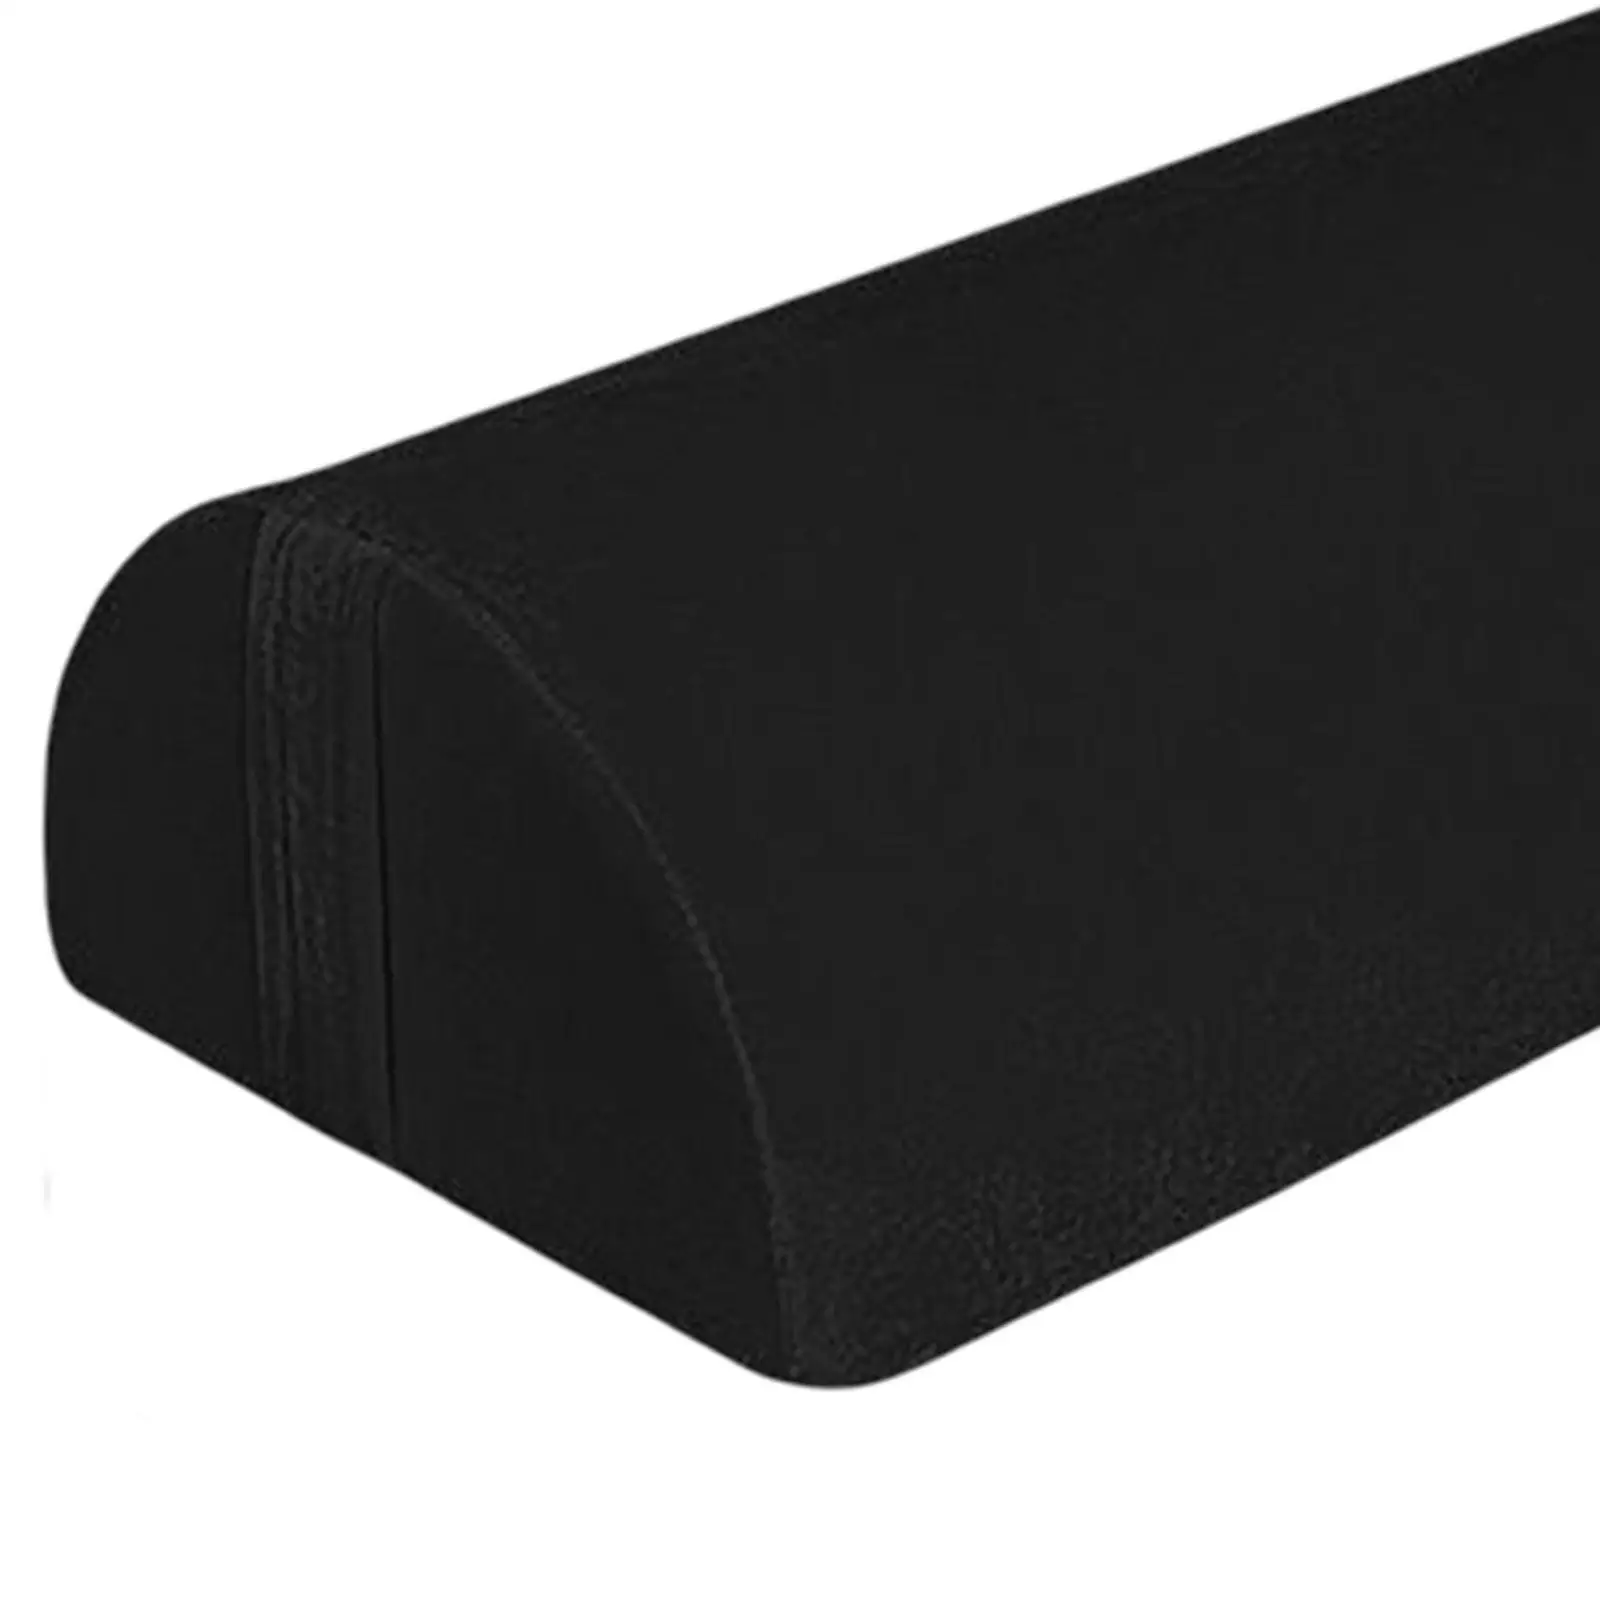 Non Slip Leg Support cushion Soft Ergonomic Footrest Pillow for Gift Office Accessories Computer Gaming Bed